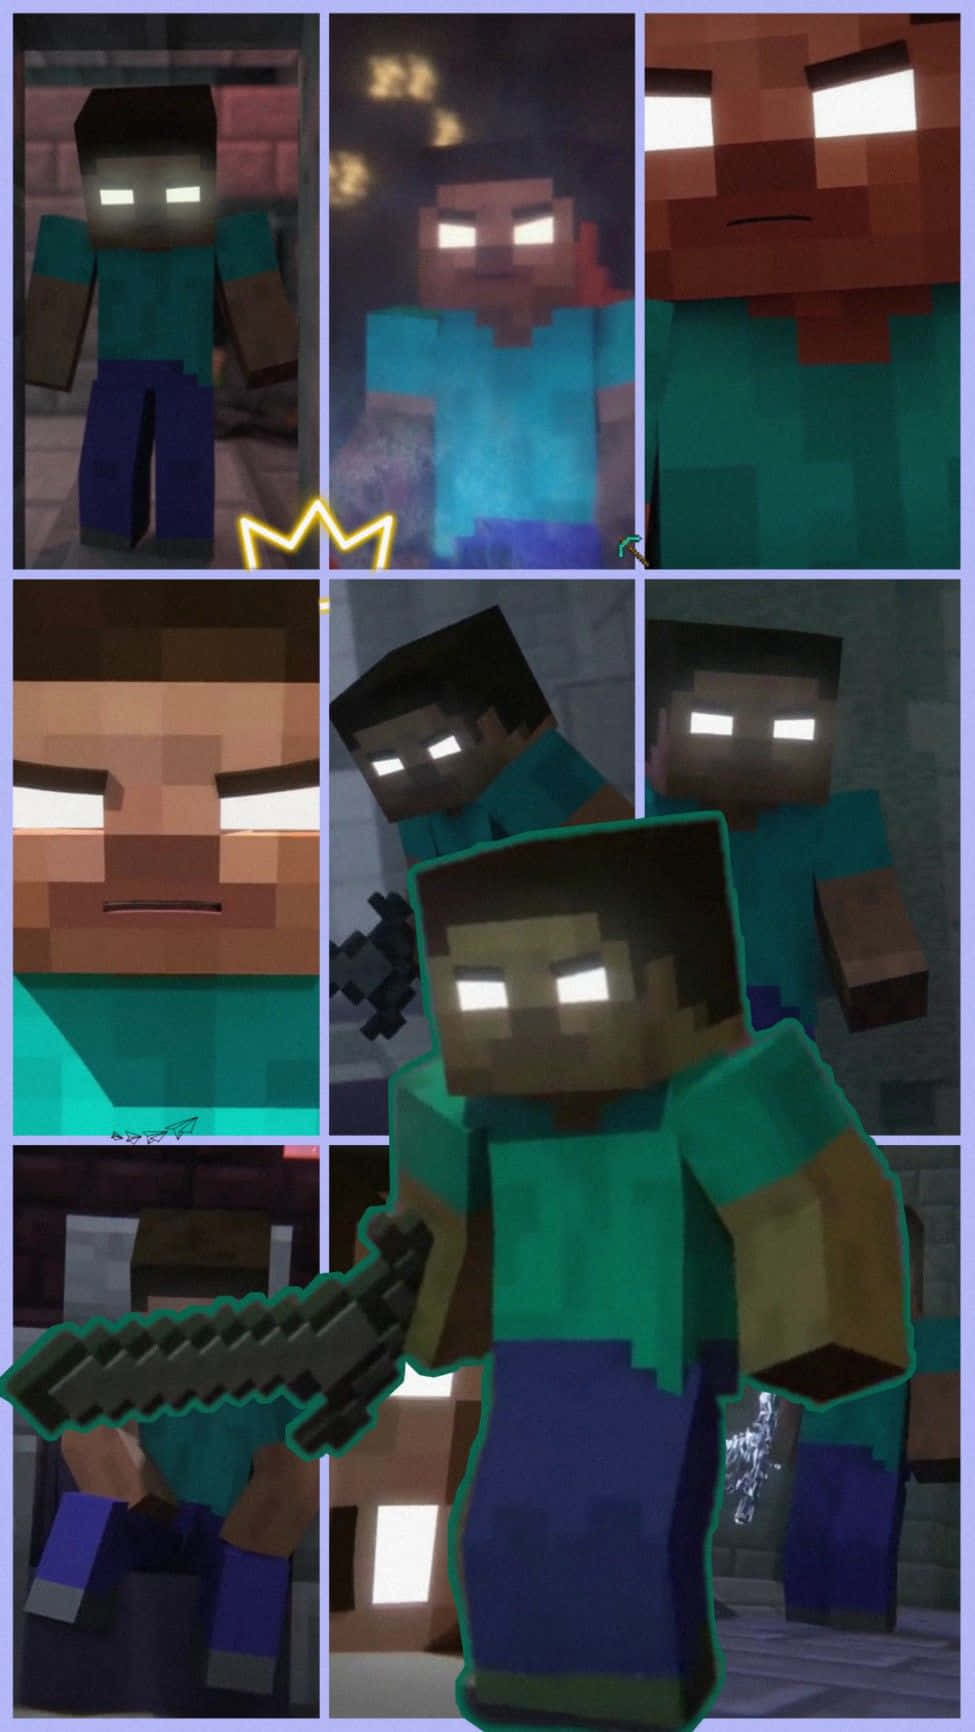 "Uniting The Troops: All Minecraft Characters Uniting For A Common Cause"